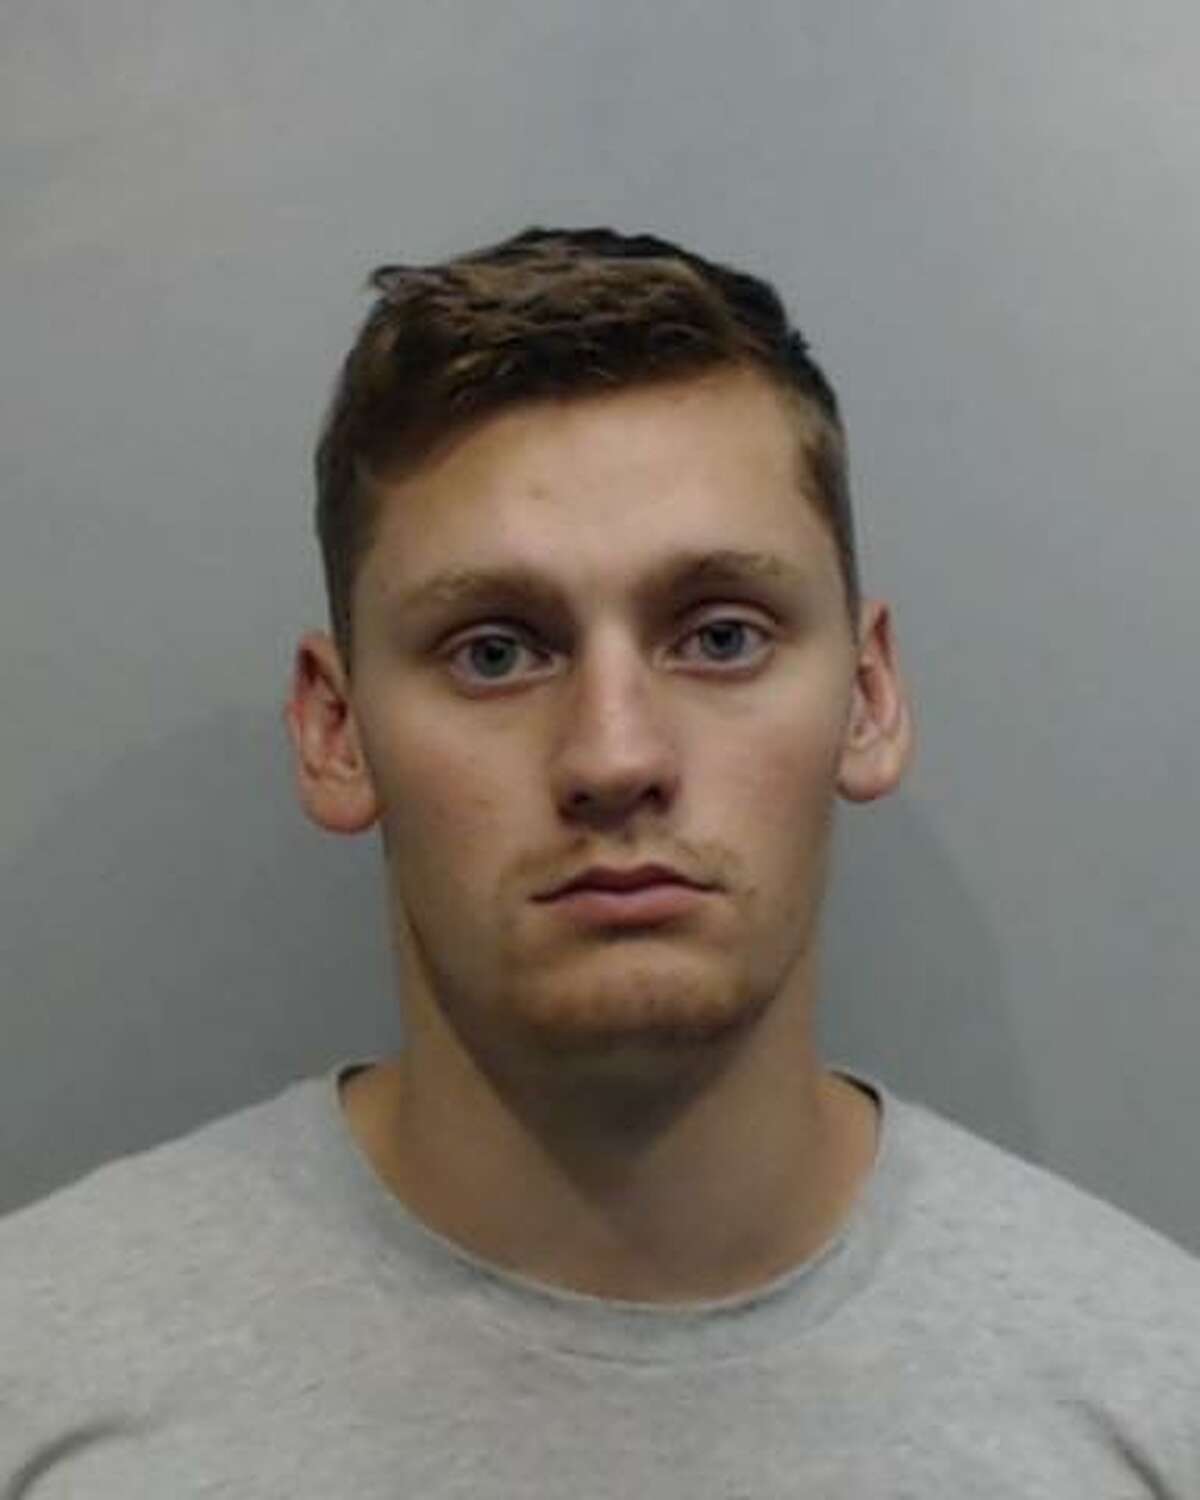 Dominick Burns, 20, is seen May 21, 2019, in a booking photo after he was extradited to the Hays County Sheriff’s Office. Burns is one of five U.S. Navy servicemen charged with four counts of aggravated sexual assault related to an incident that allegedly occurred on May 19, 2018 in San Marcos.